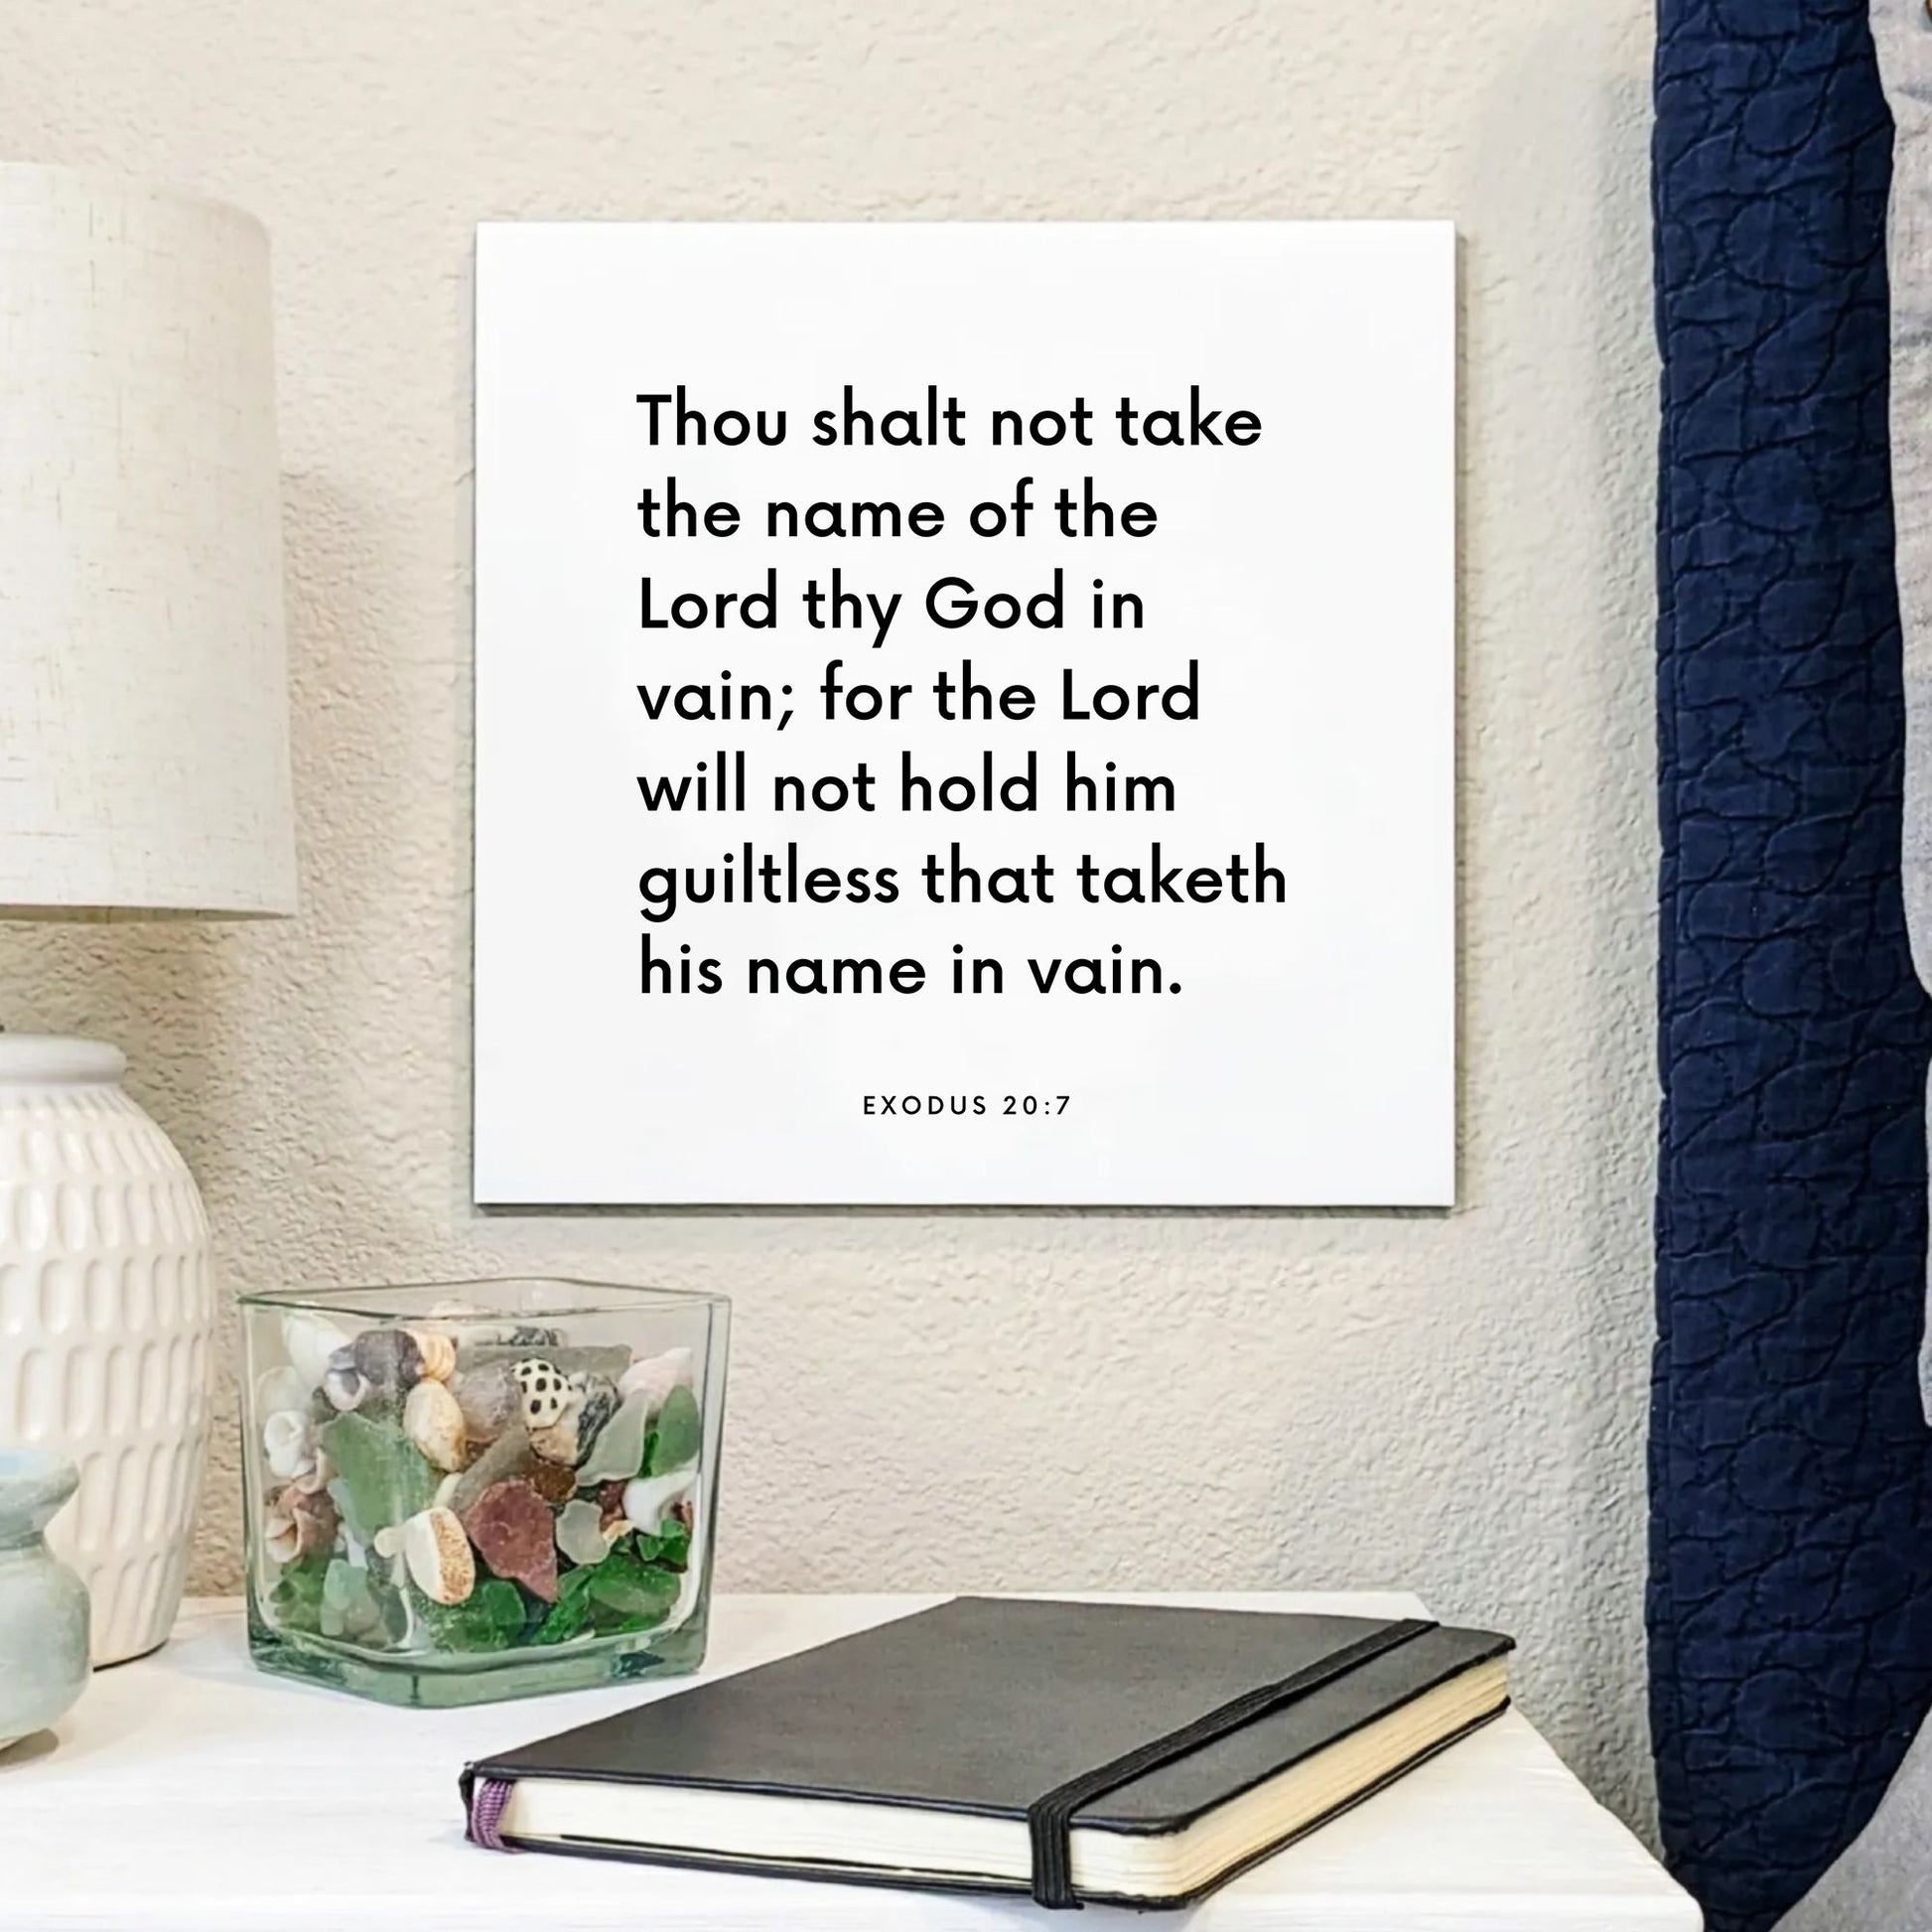 Bedside mouting of the scripture tile for Exodus 20:7 - "Thou shalt not take the name of the Lord thy God in vain"